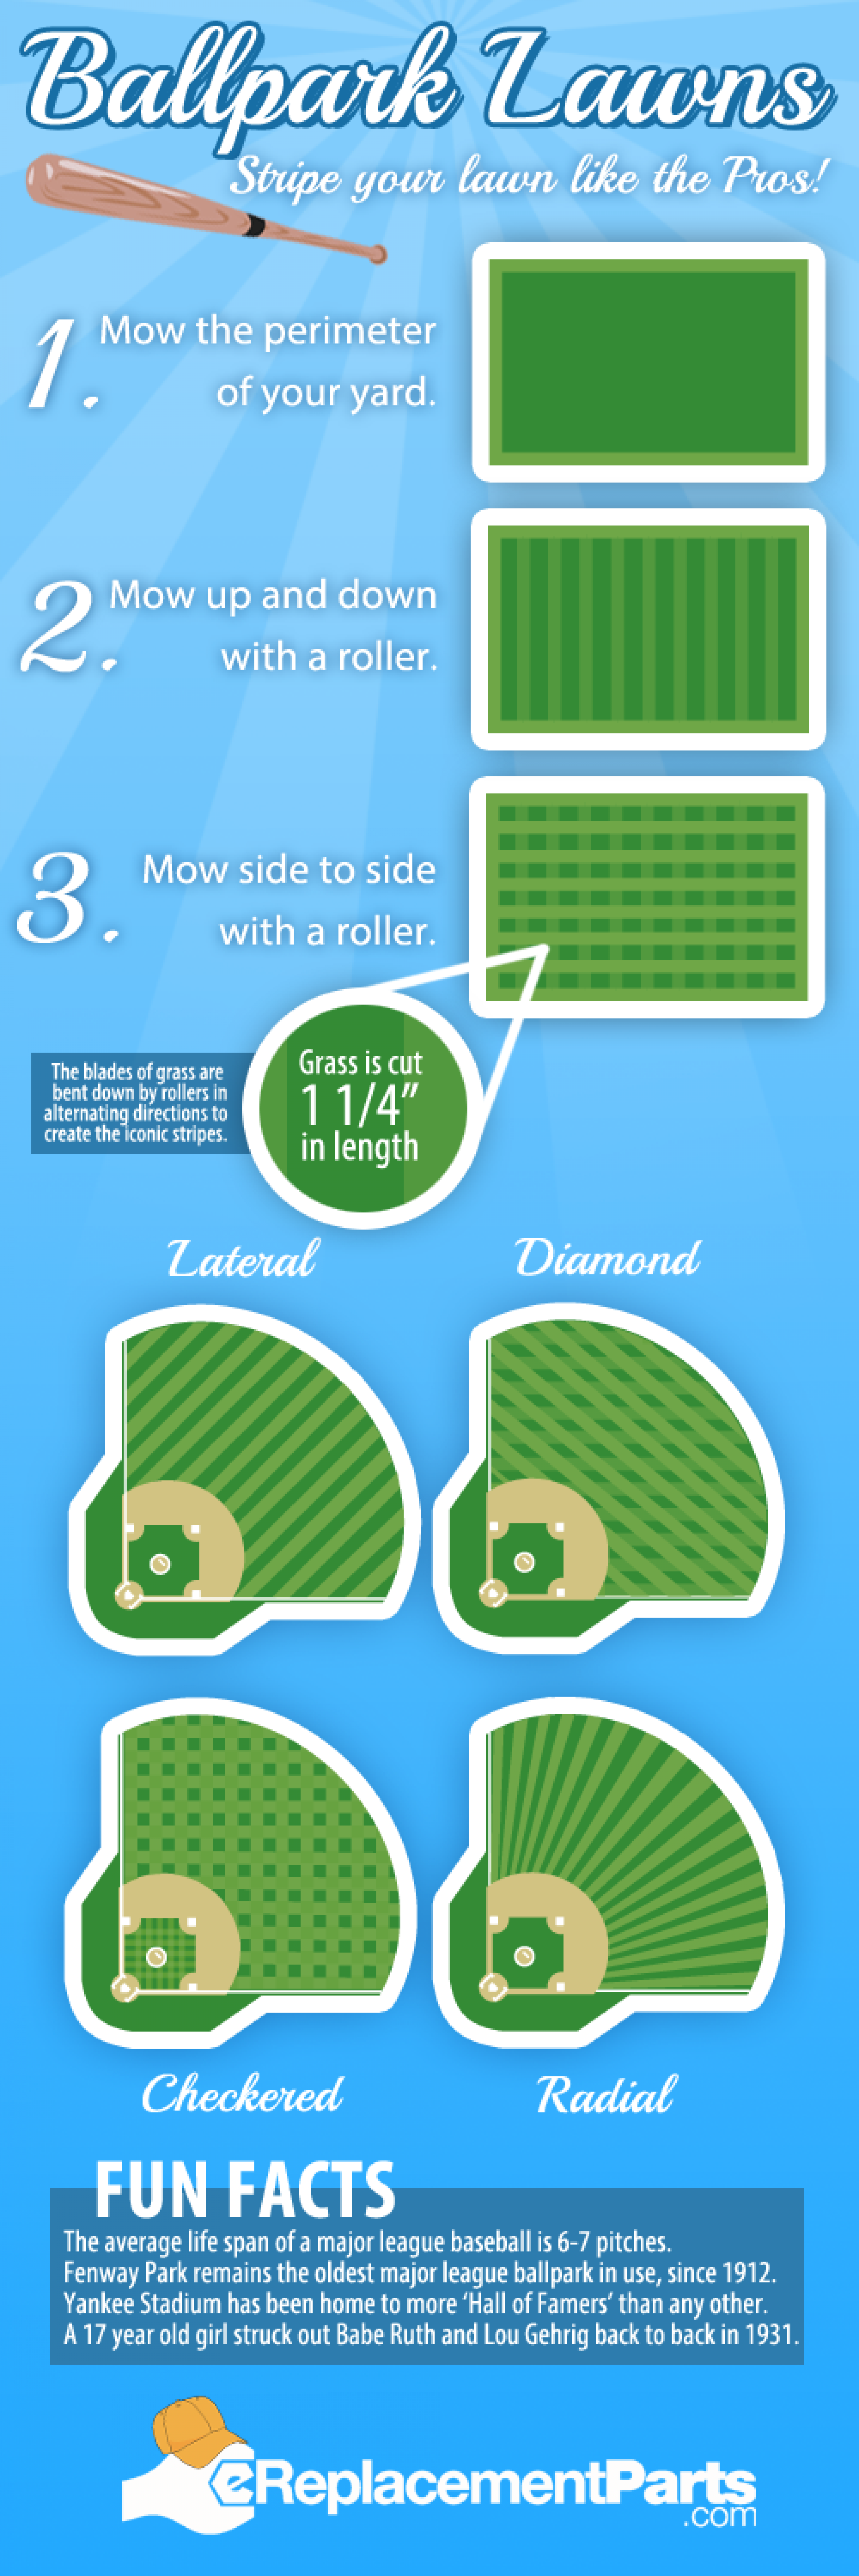 Ballpark Lawns - Stripe your lawn like the Pros! Infographic